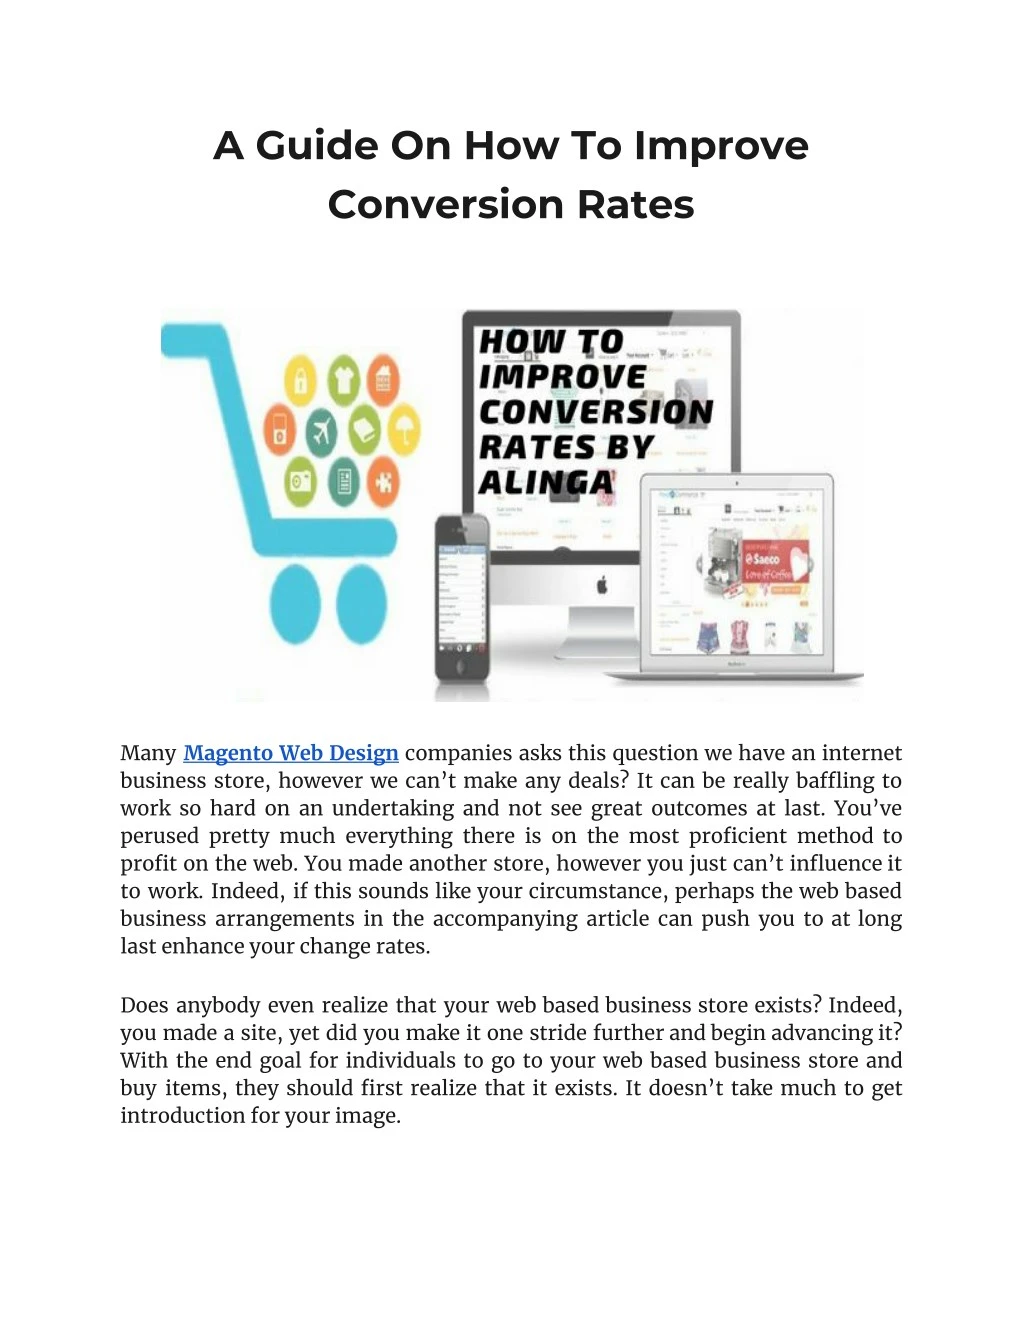 Ppt How To Improve Conversion Rates By Alinga Powerpoint Presentation Id7986142 